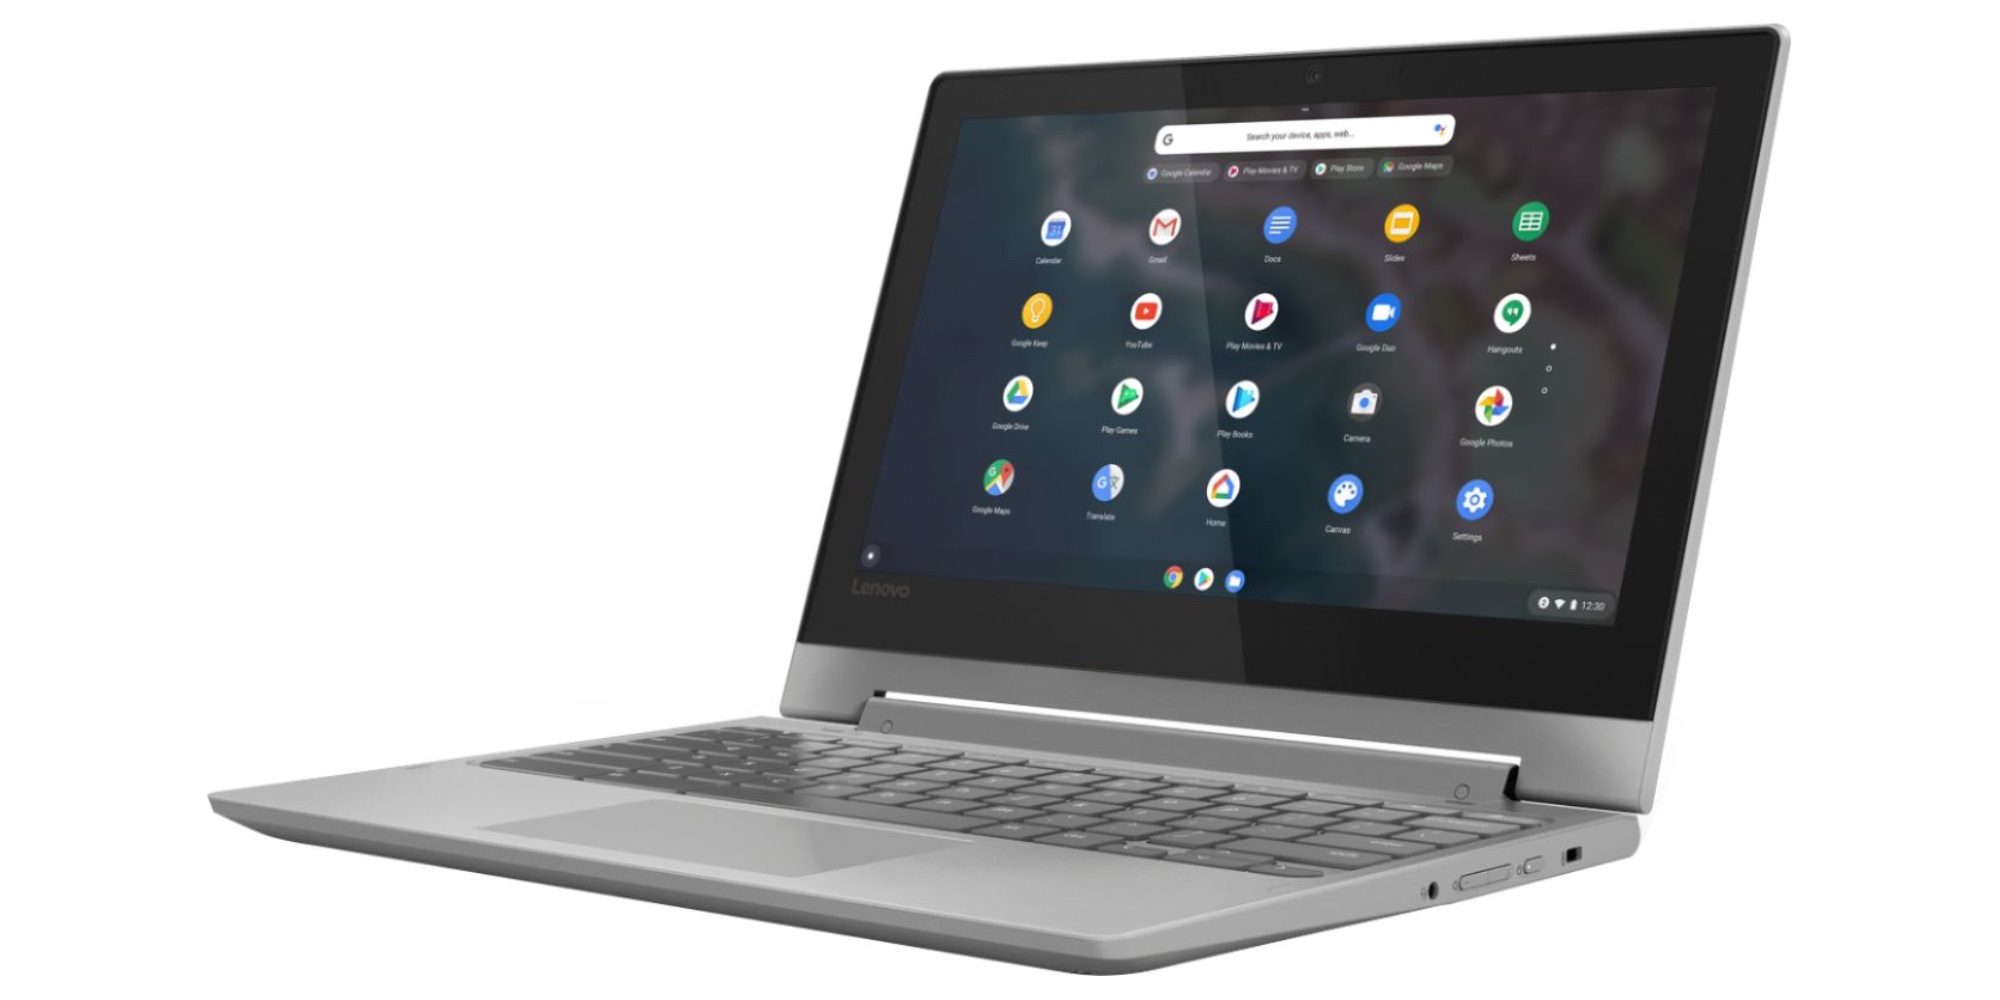 Save $100 on Lenovo's 11inch Chromebook Flex 3 at an alltime low of